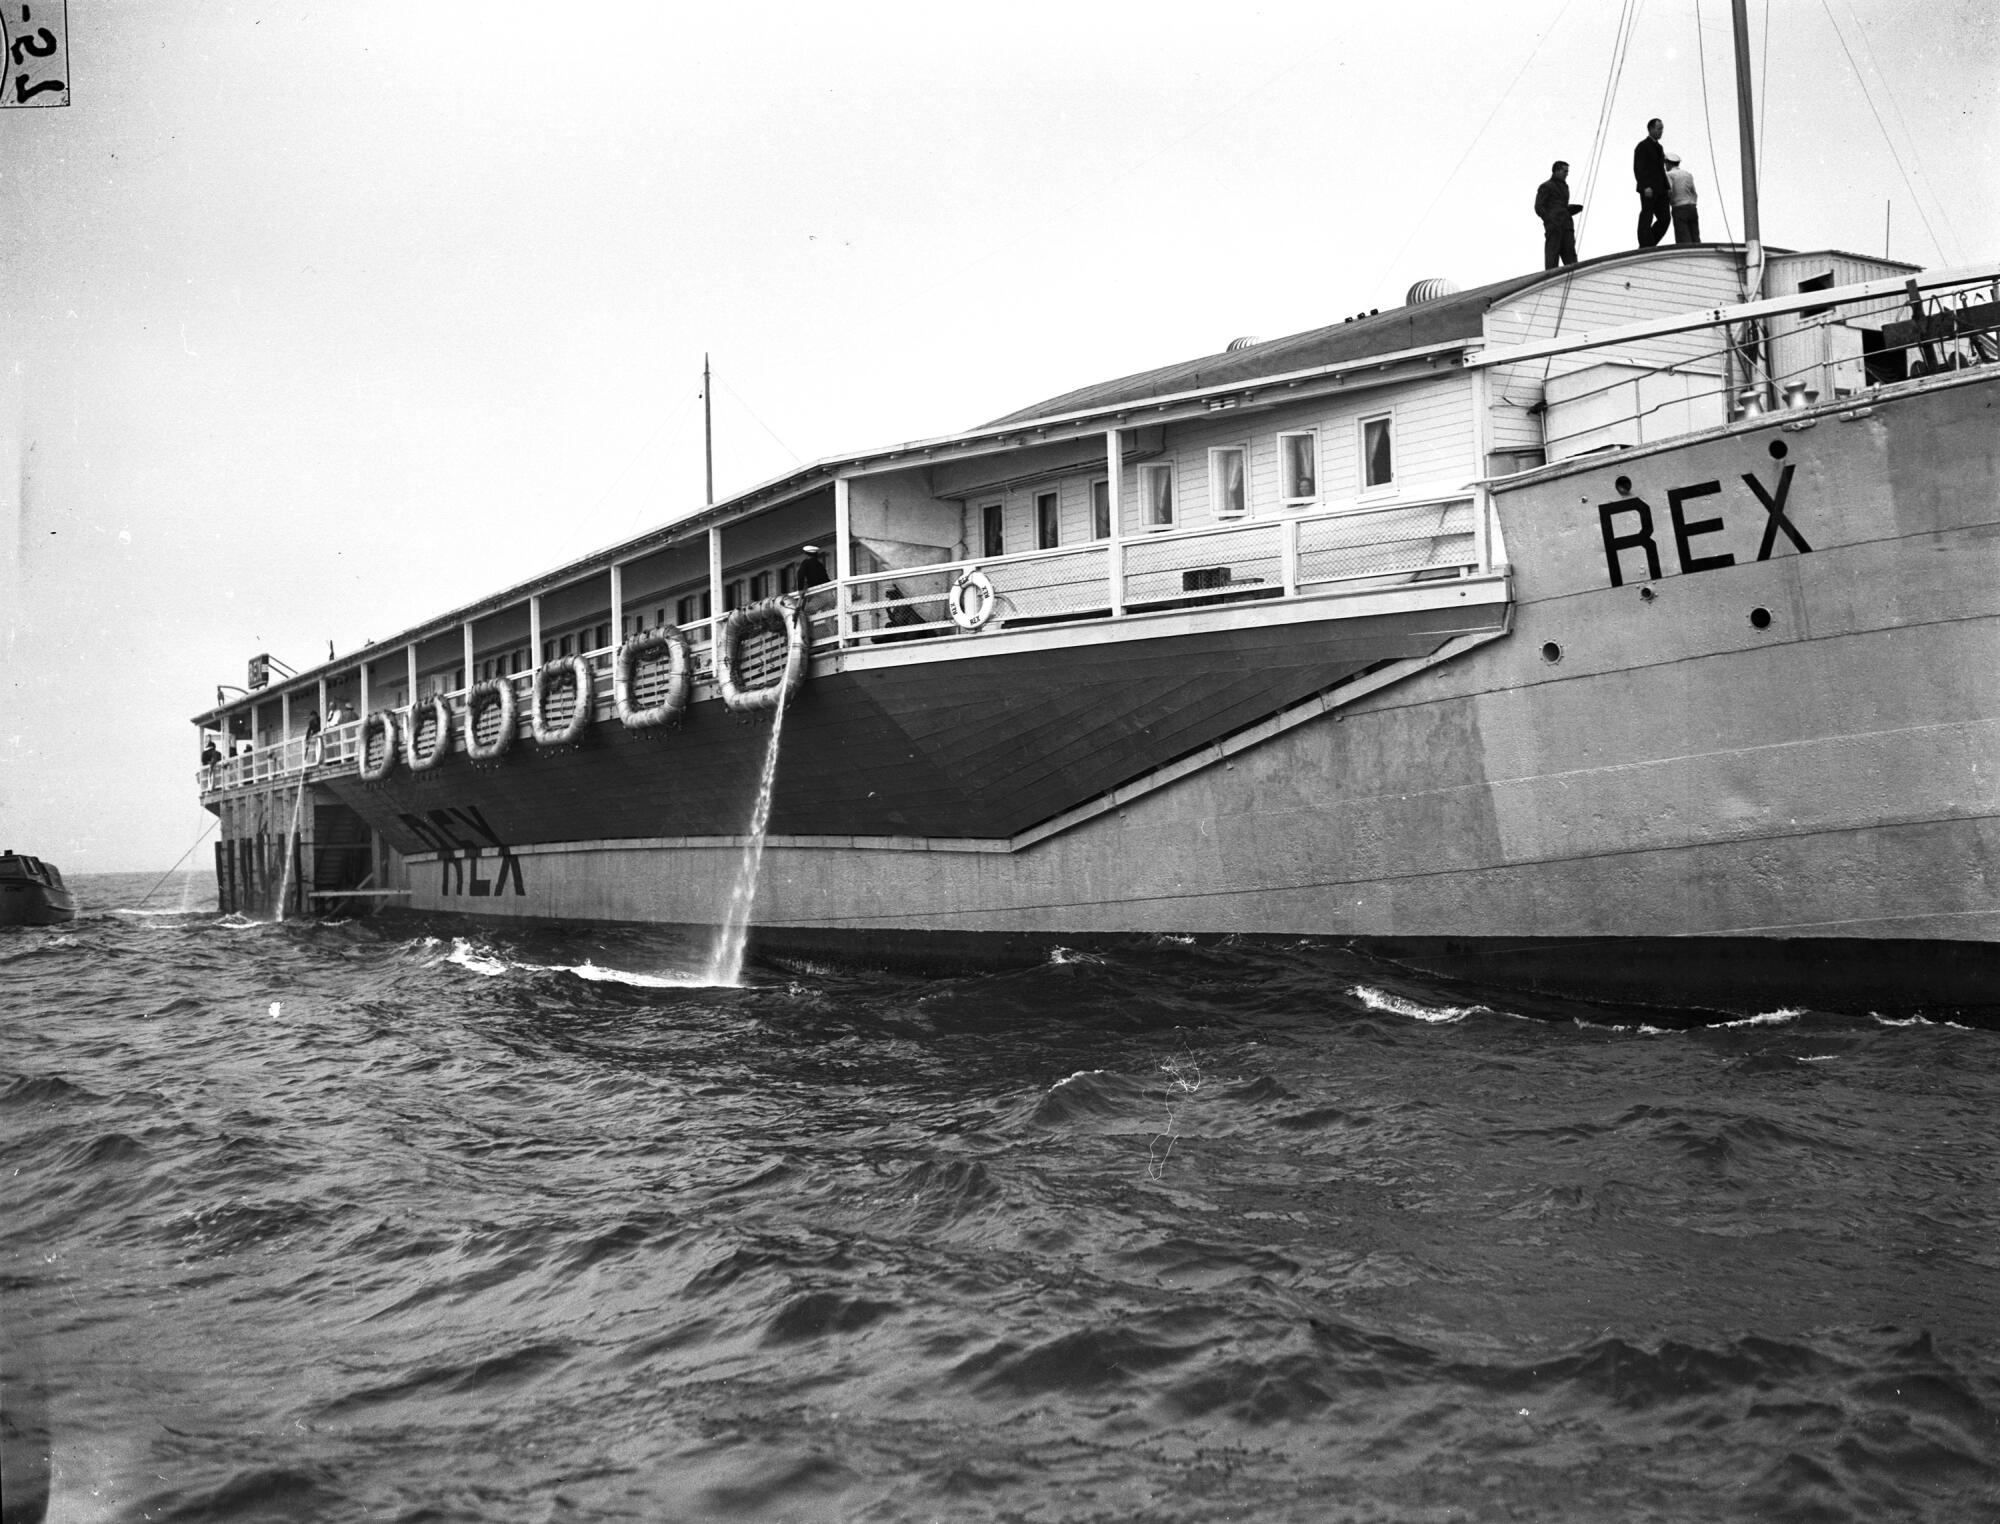 The S.S. Rex deployed powerful water cannons to fend off agents trying to board it on Aug. 1, 1939.